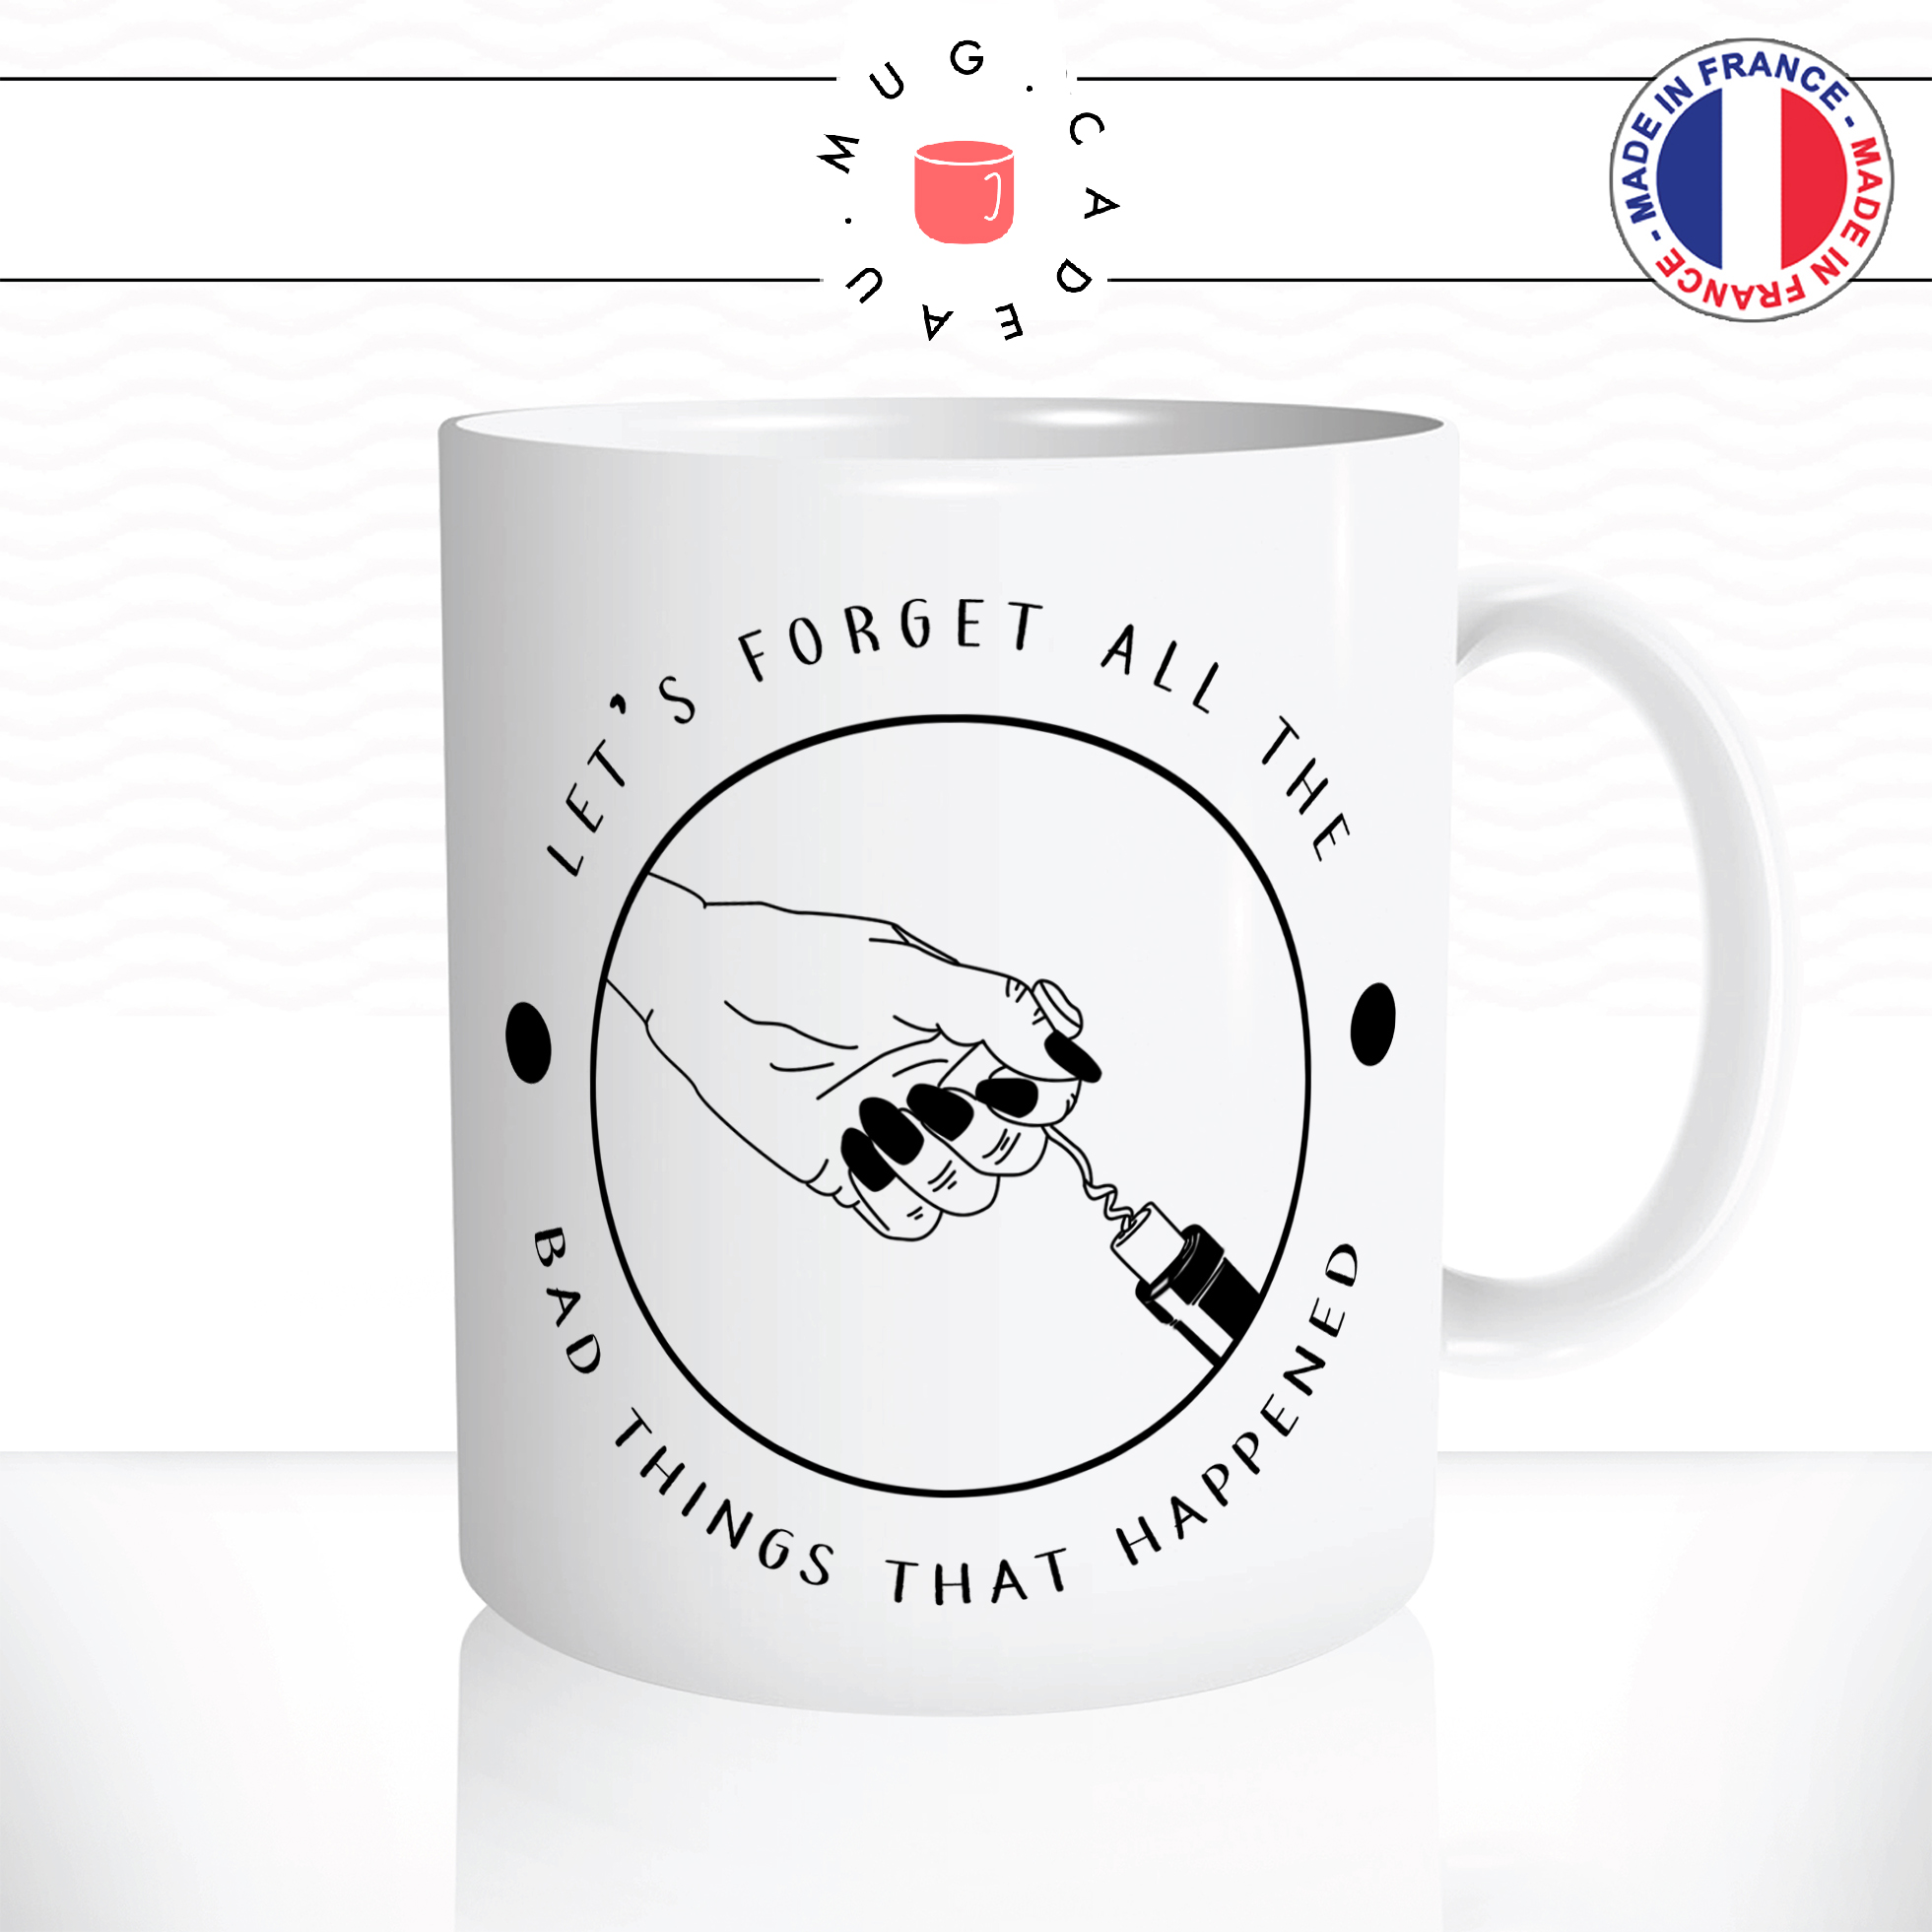 mug-tasse-ref21-main-dessin-noir-ouvre-bouteille-lets-forget-the-bad-things-happened-cafe-the-mugs-tasses-personnalise-anse-droite